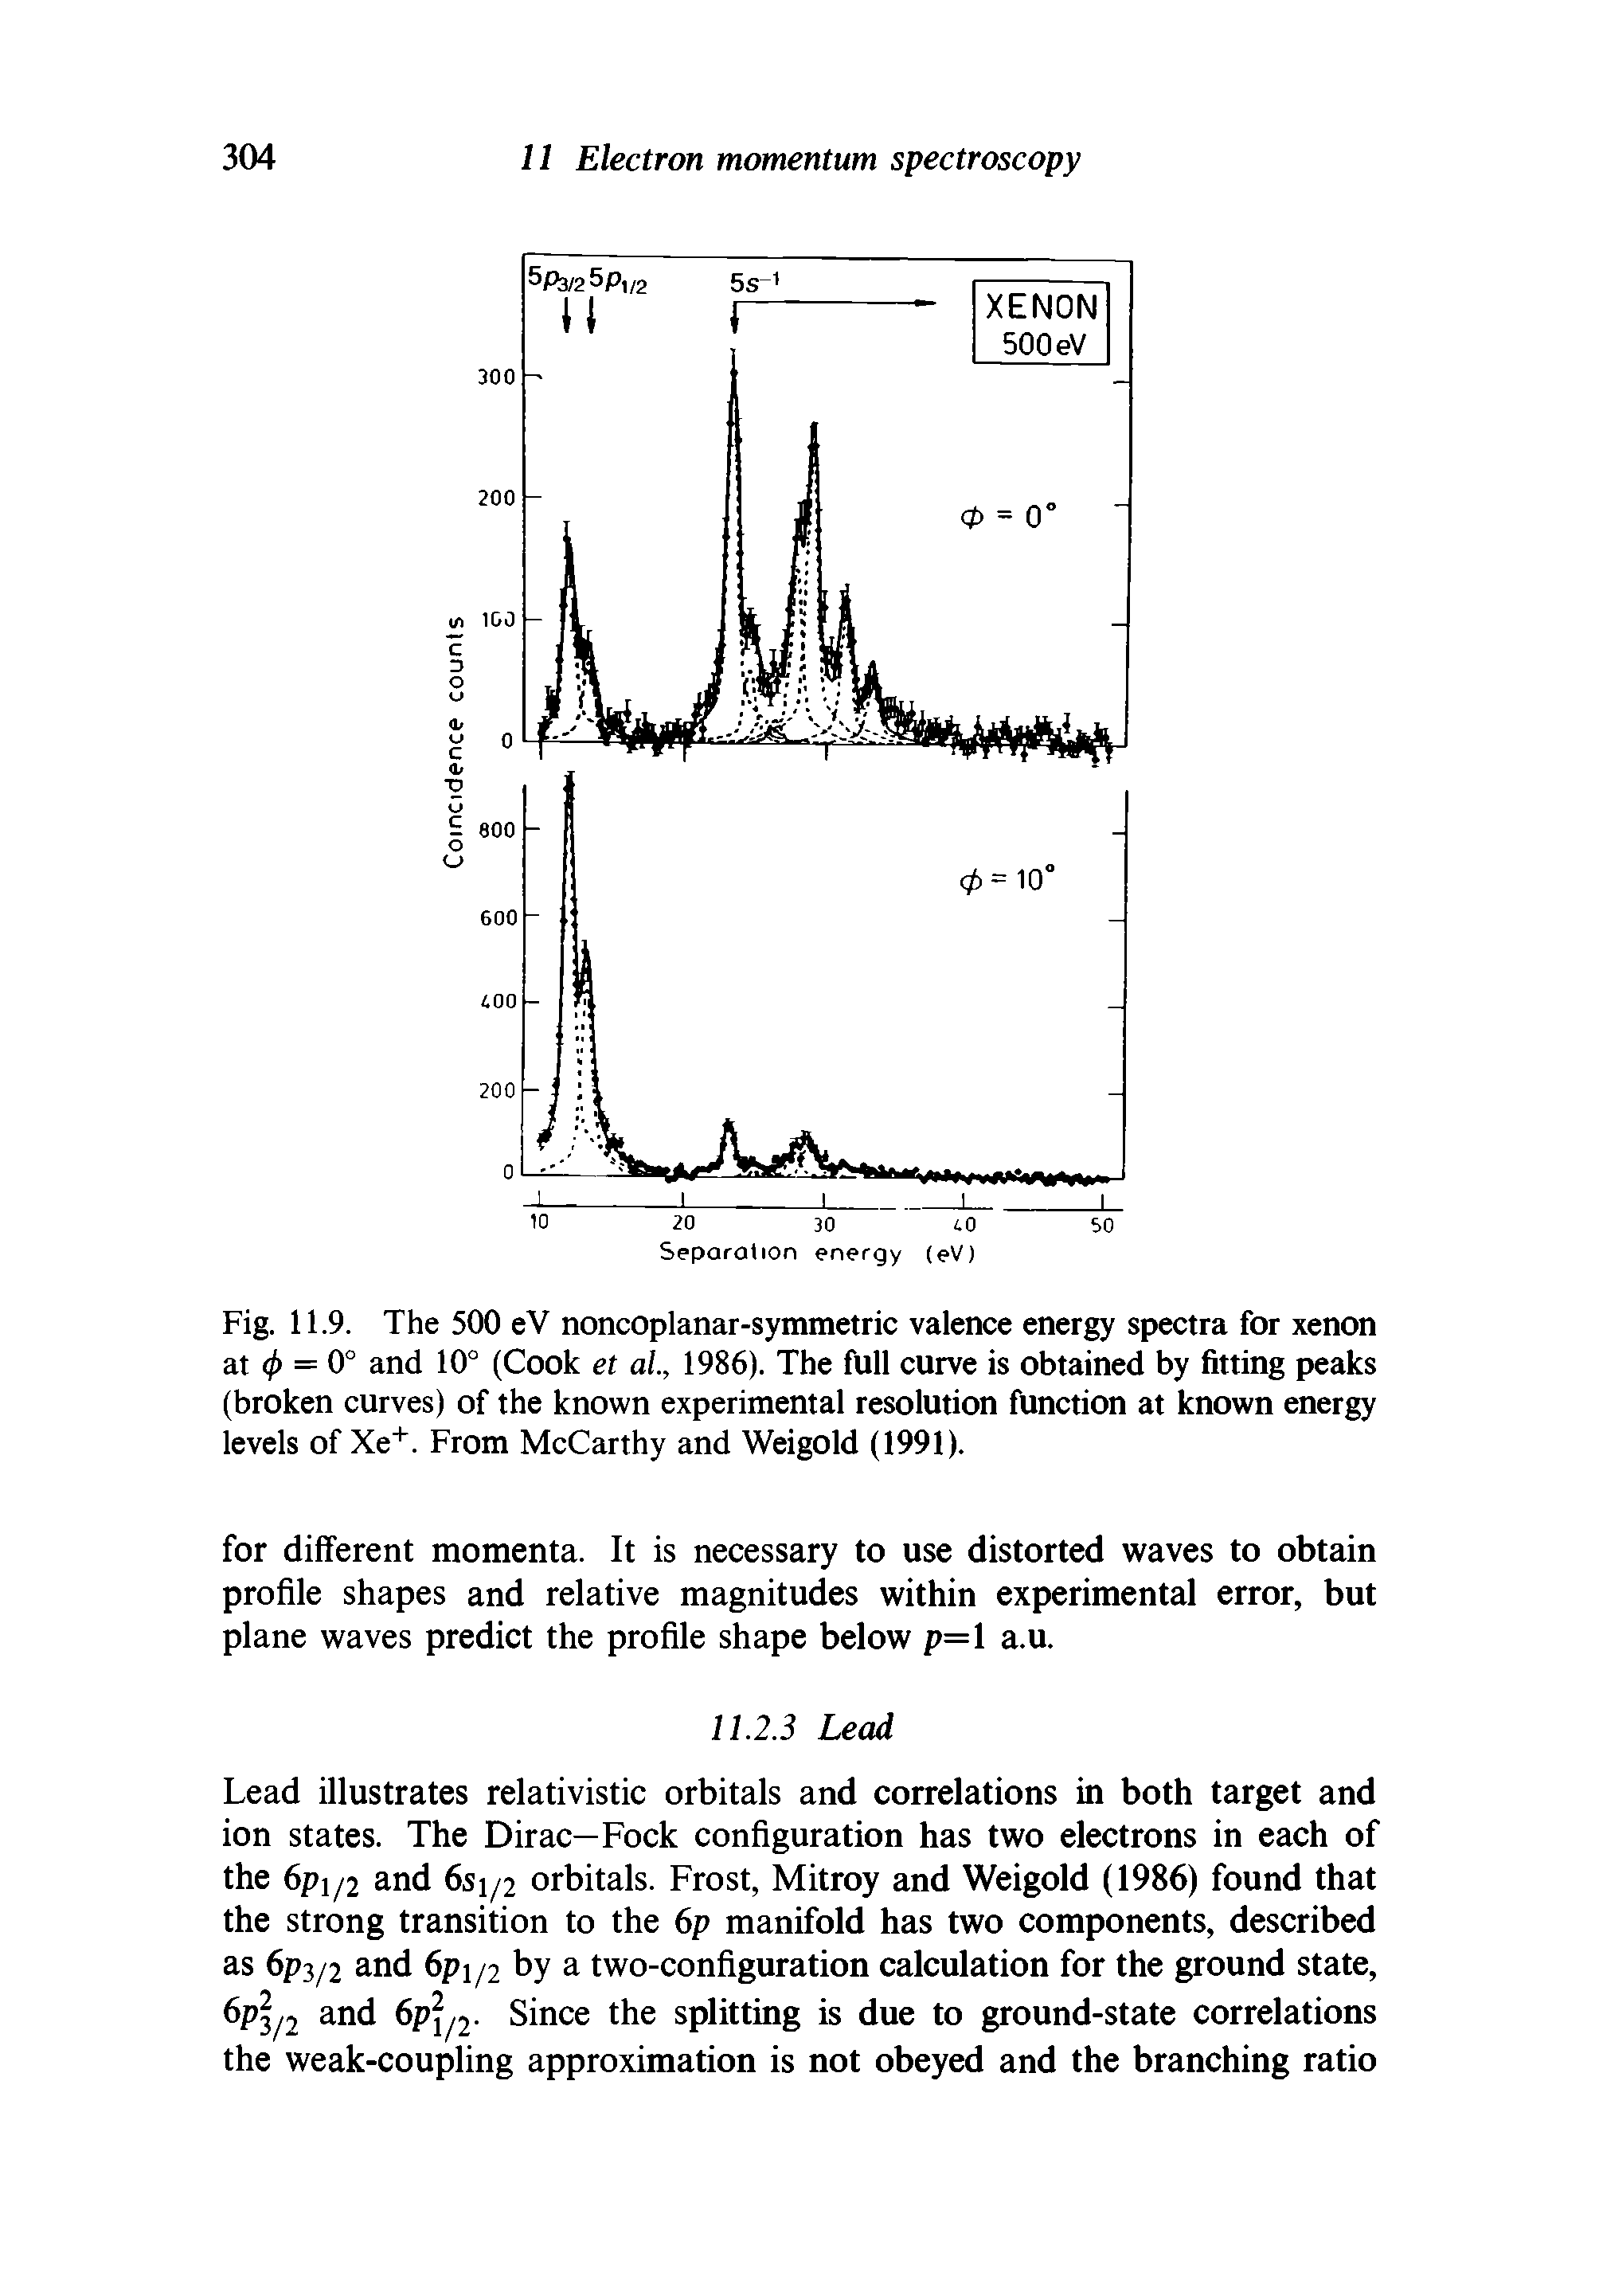 Fig. 11.9. The 500 eV noncoplanar-symmetric valence energy spectra for xenon at 0 = 0° and 10° (Cook et al, 1986). The full curve is obtained by fitting peaks (broken curves) of the known experimental resolution function at known energy levels of Xe" ". From McCarthy and Weigold (1991).